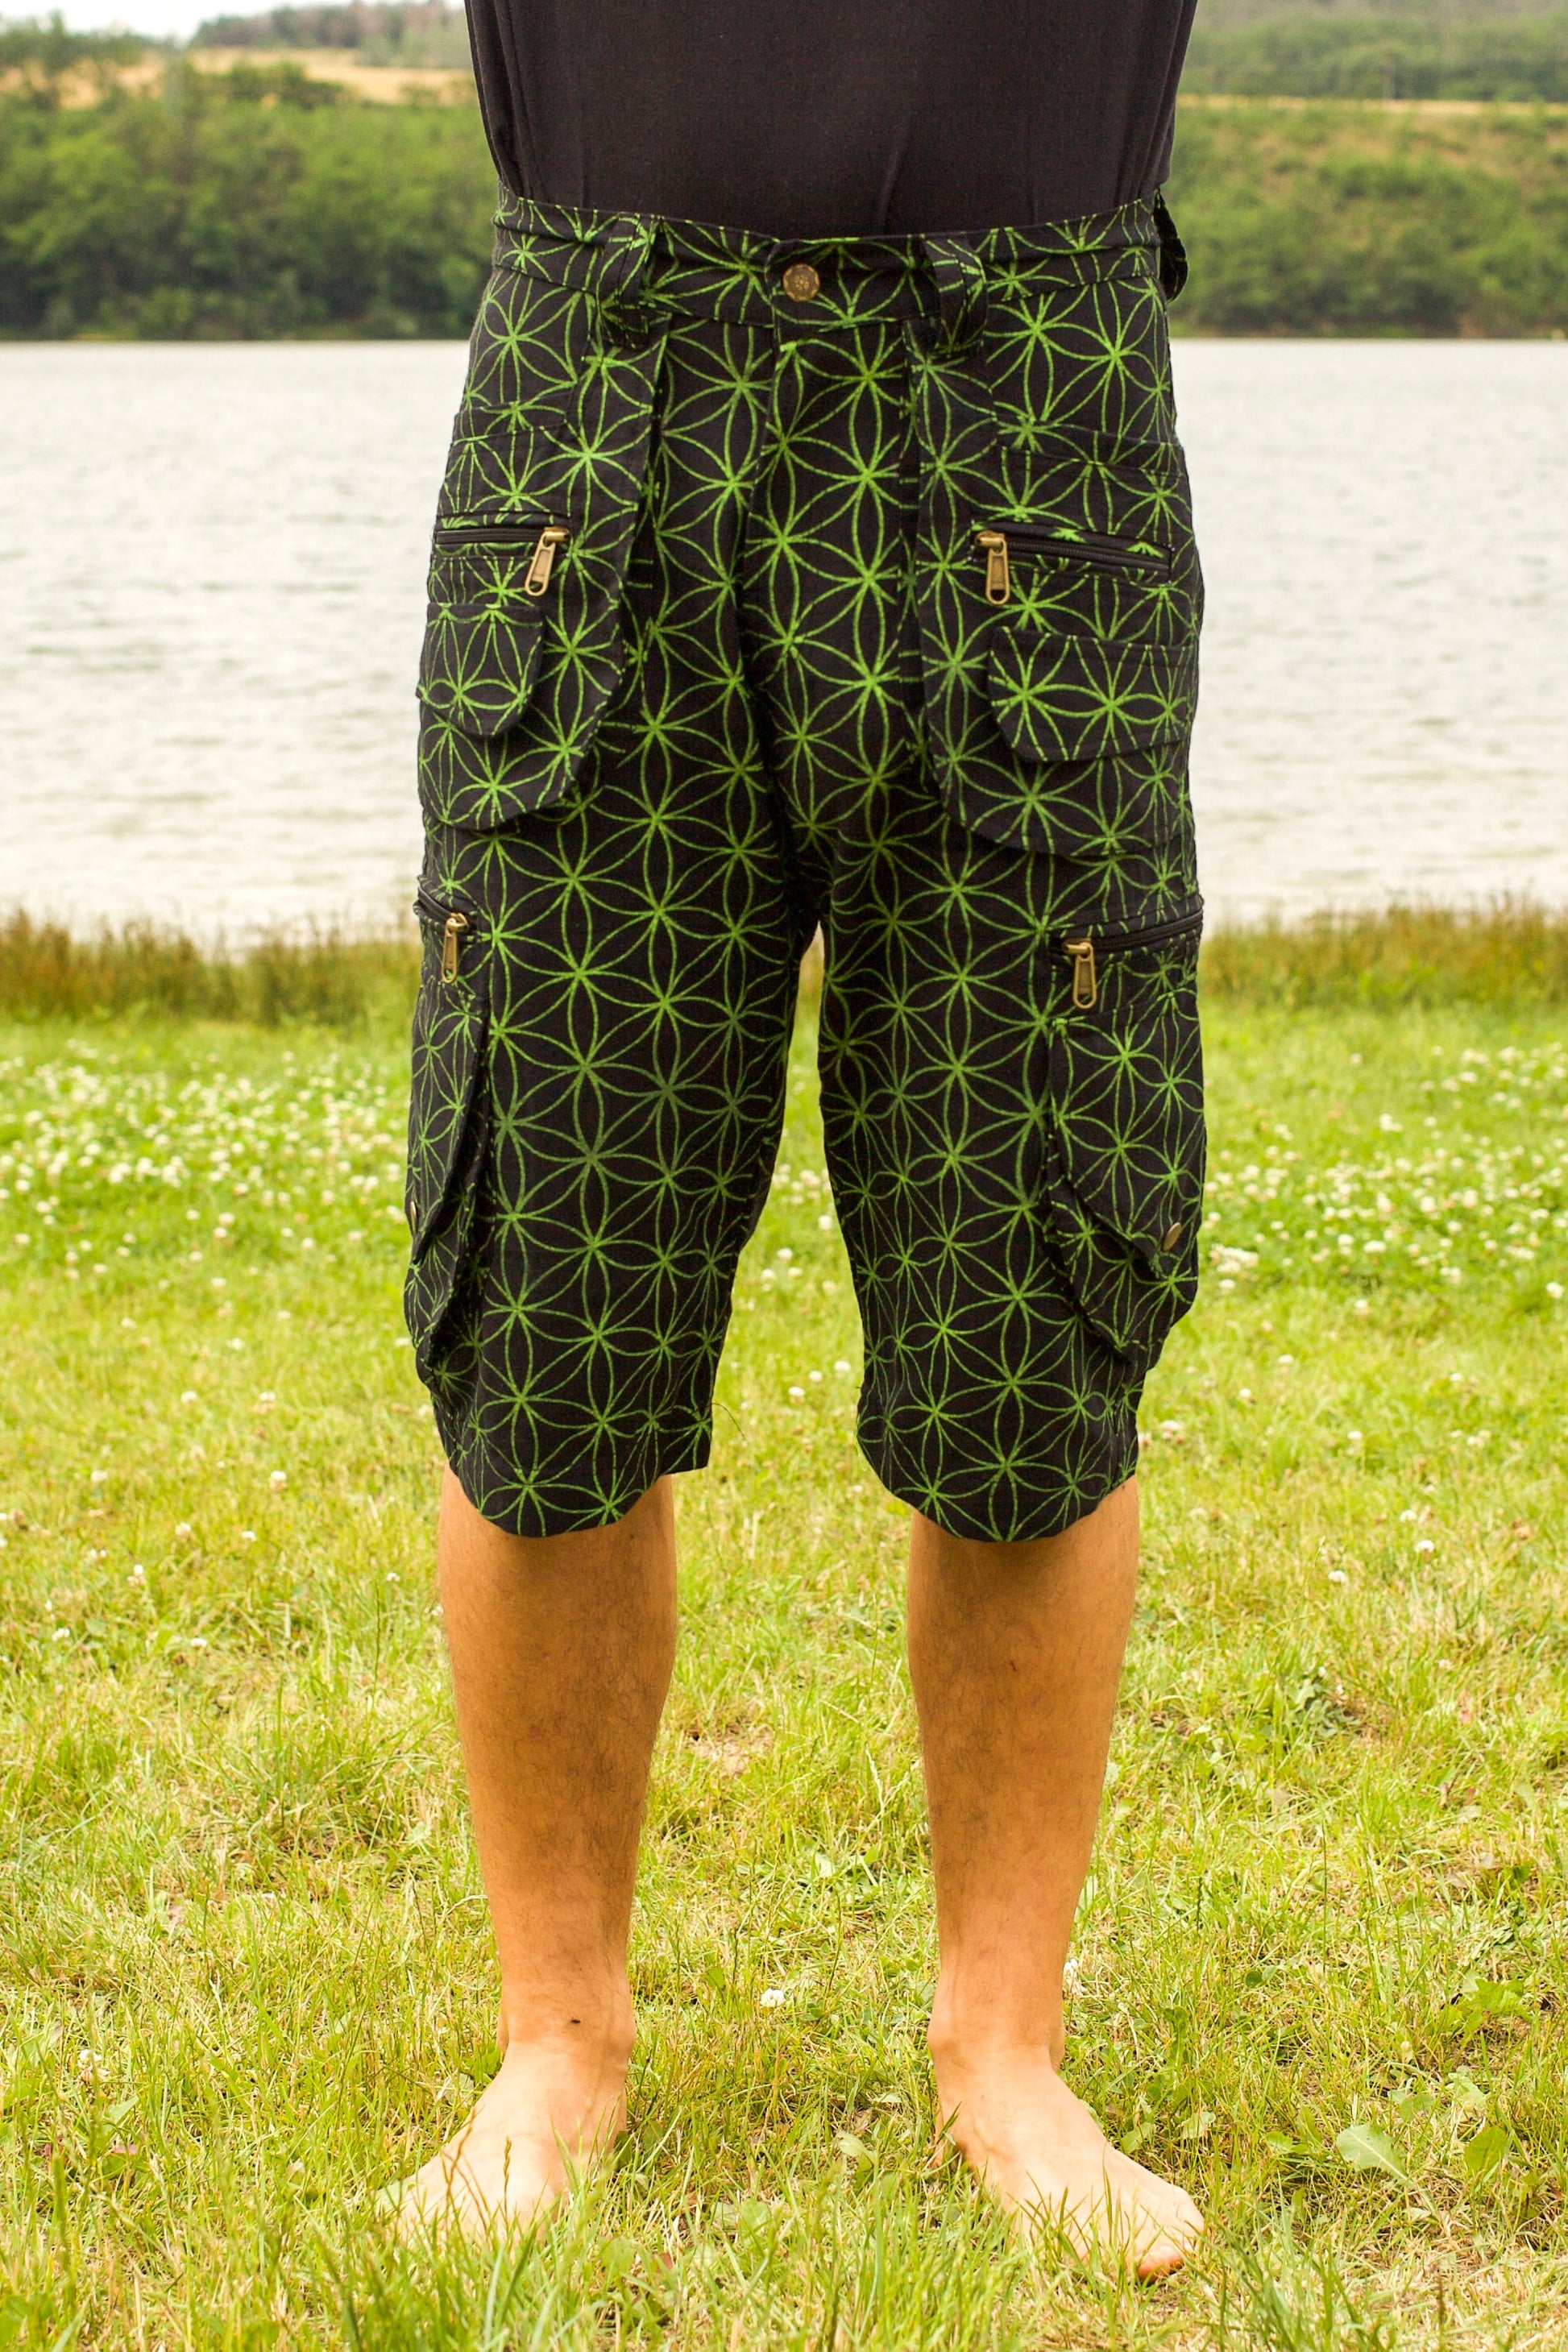 green Flower of Life Pants with many pockets - intelligent 2 in 1 shorts or long pants - handmade comfortable sacred geometry pattern